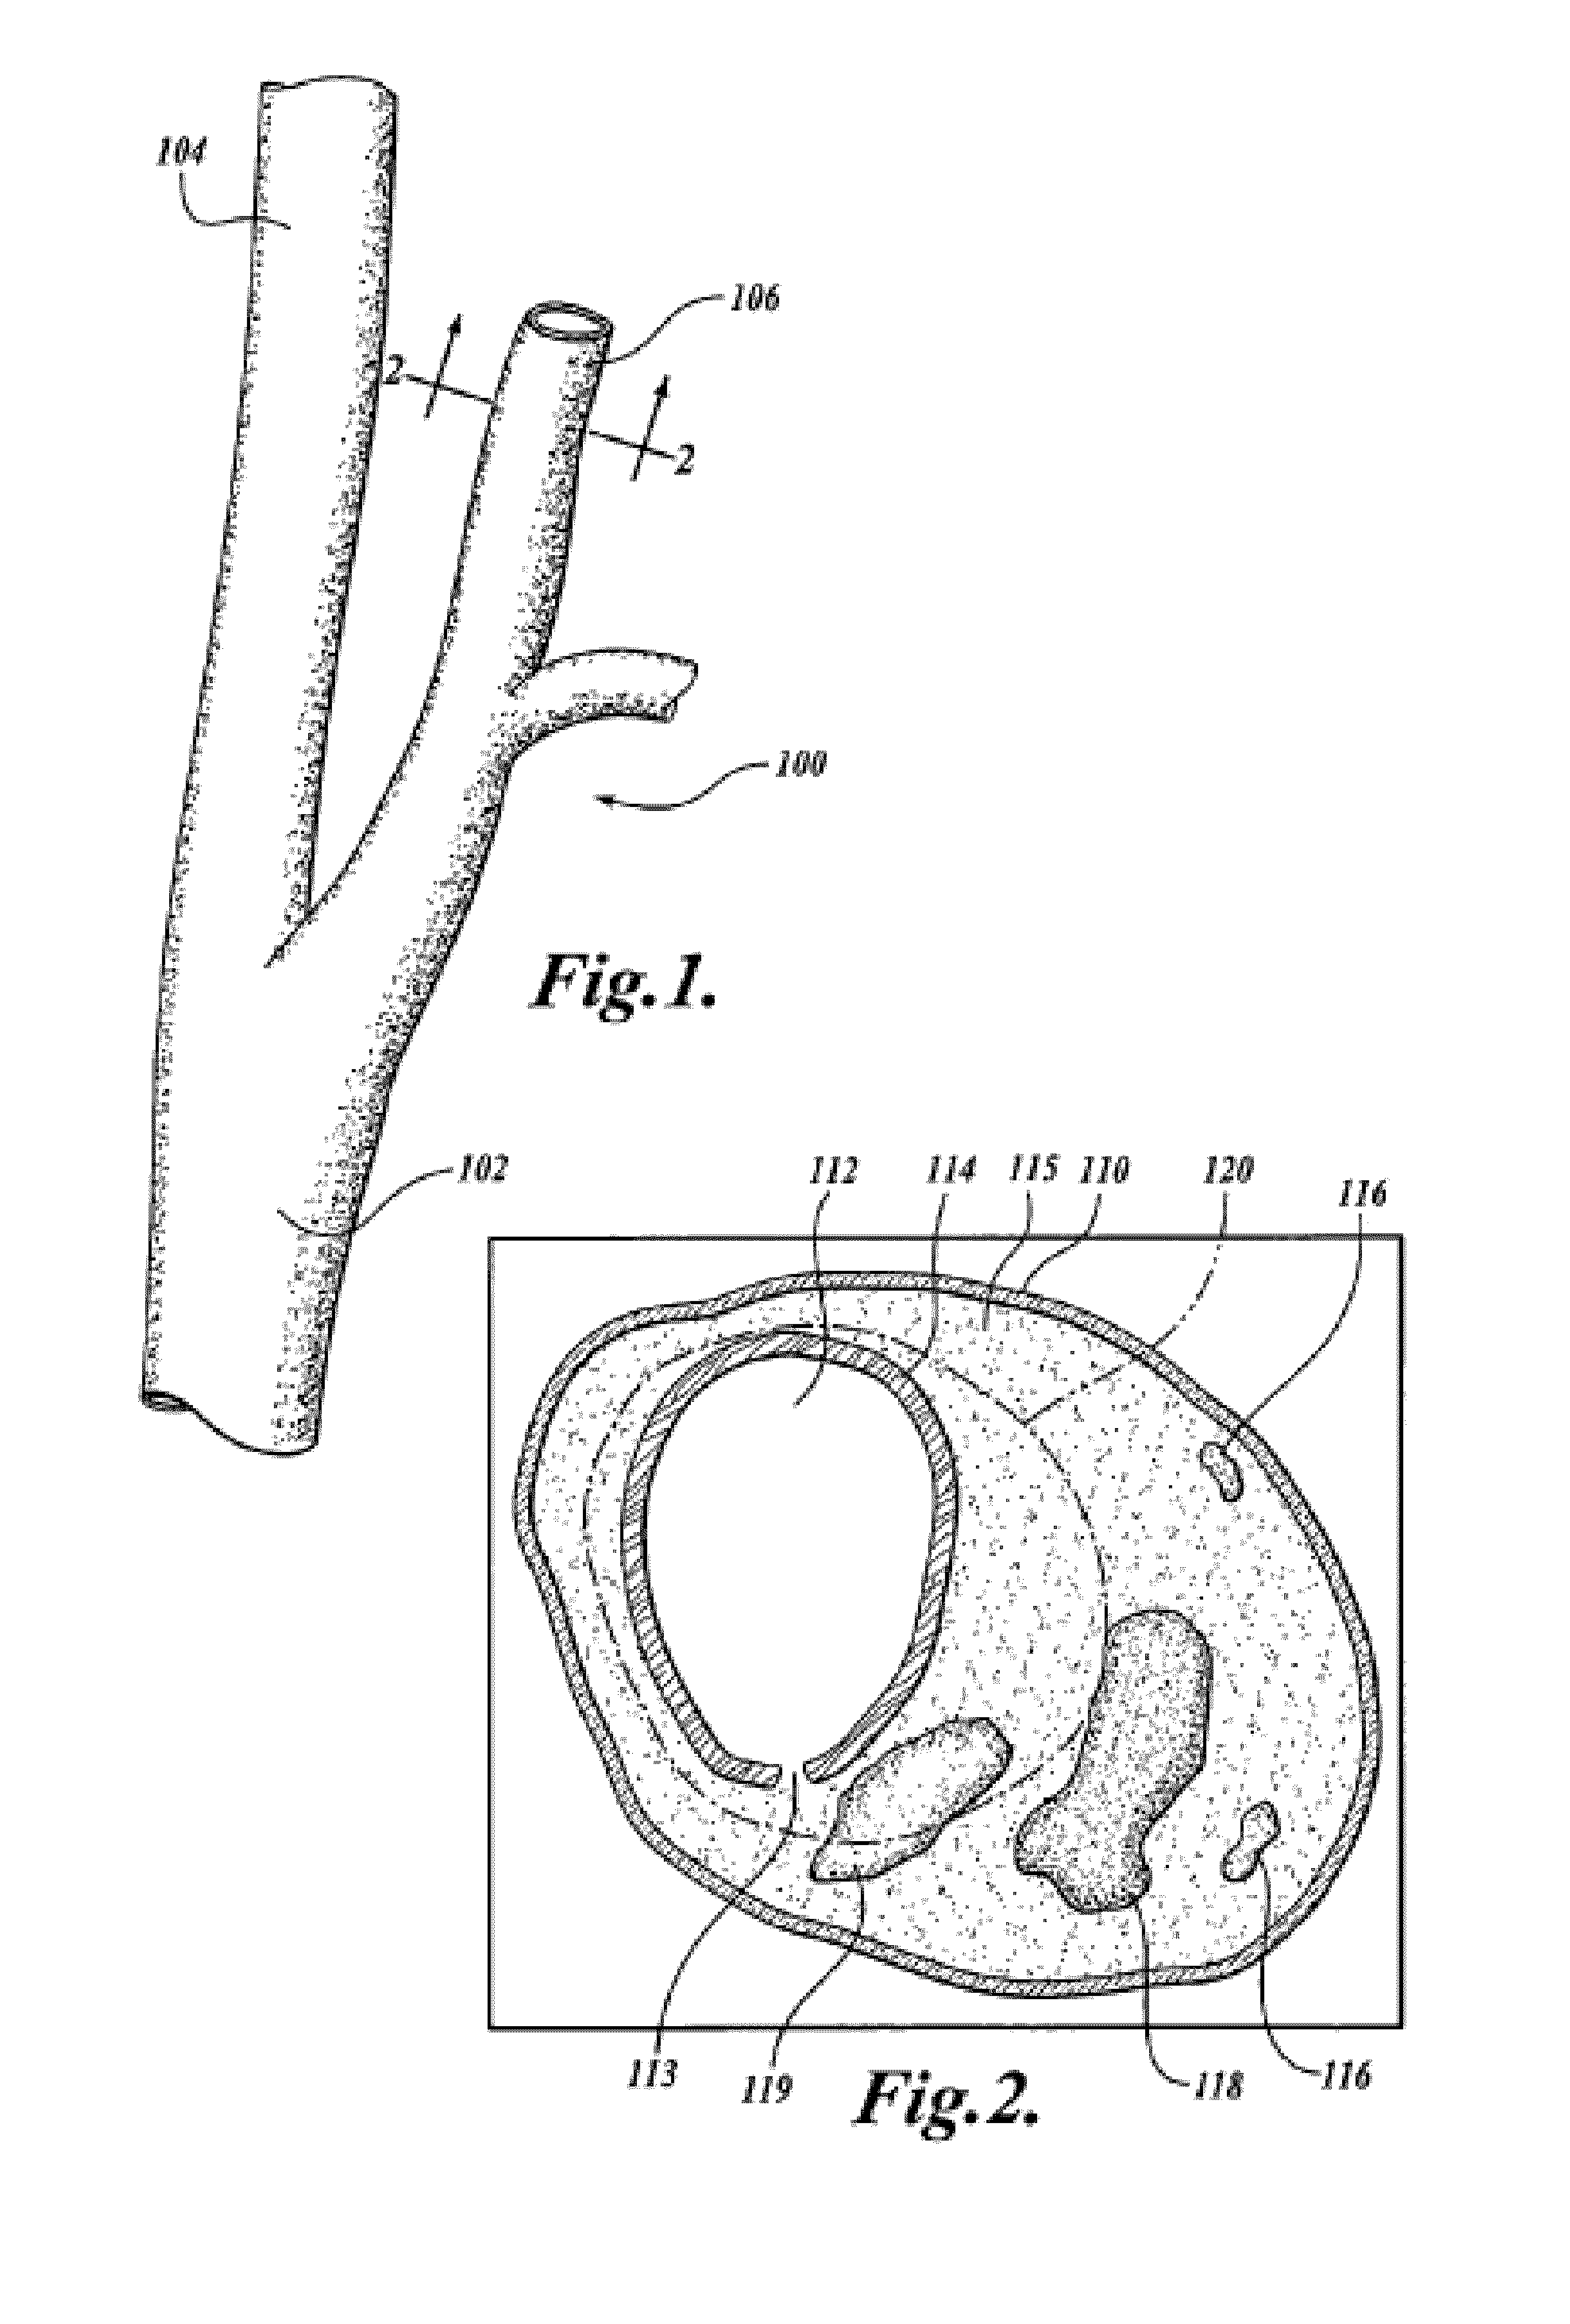 Method and System for Plaque Lesion Characterization